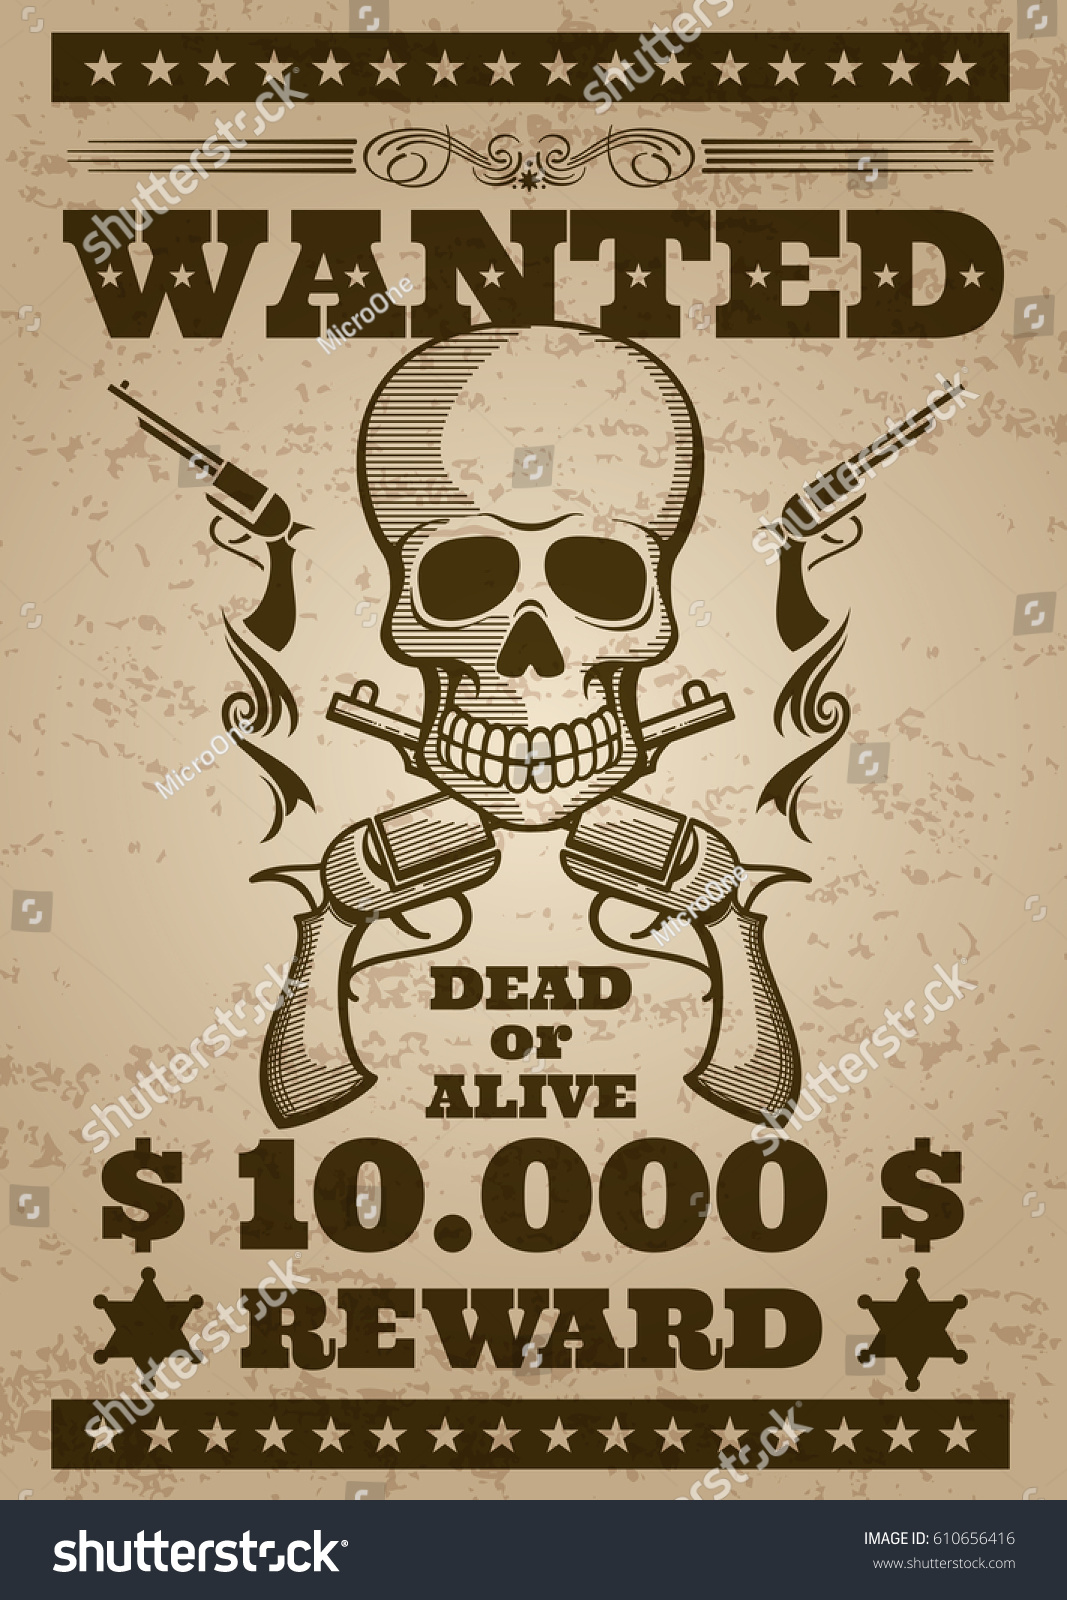 Retro Wanted Vector Poster Wild West Stock Vector (Royalty Free) 610656416